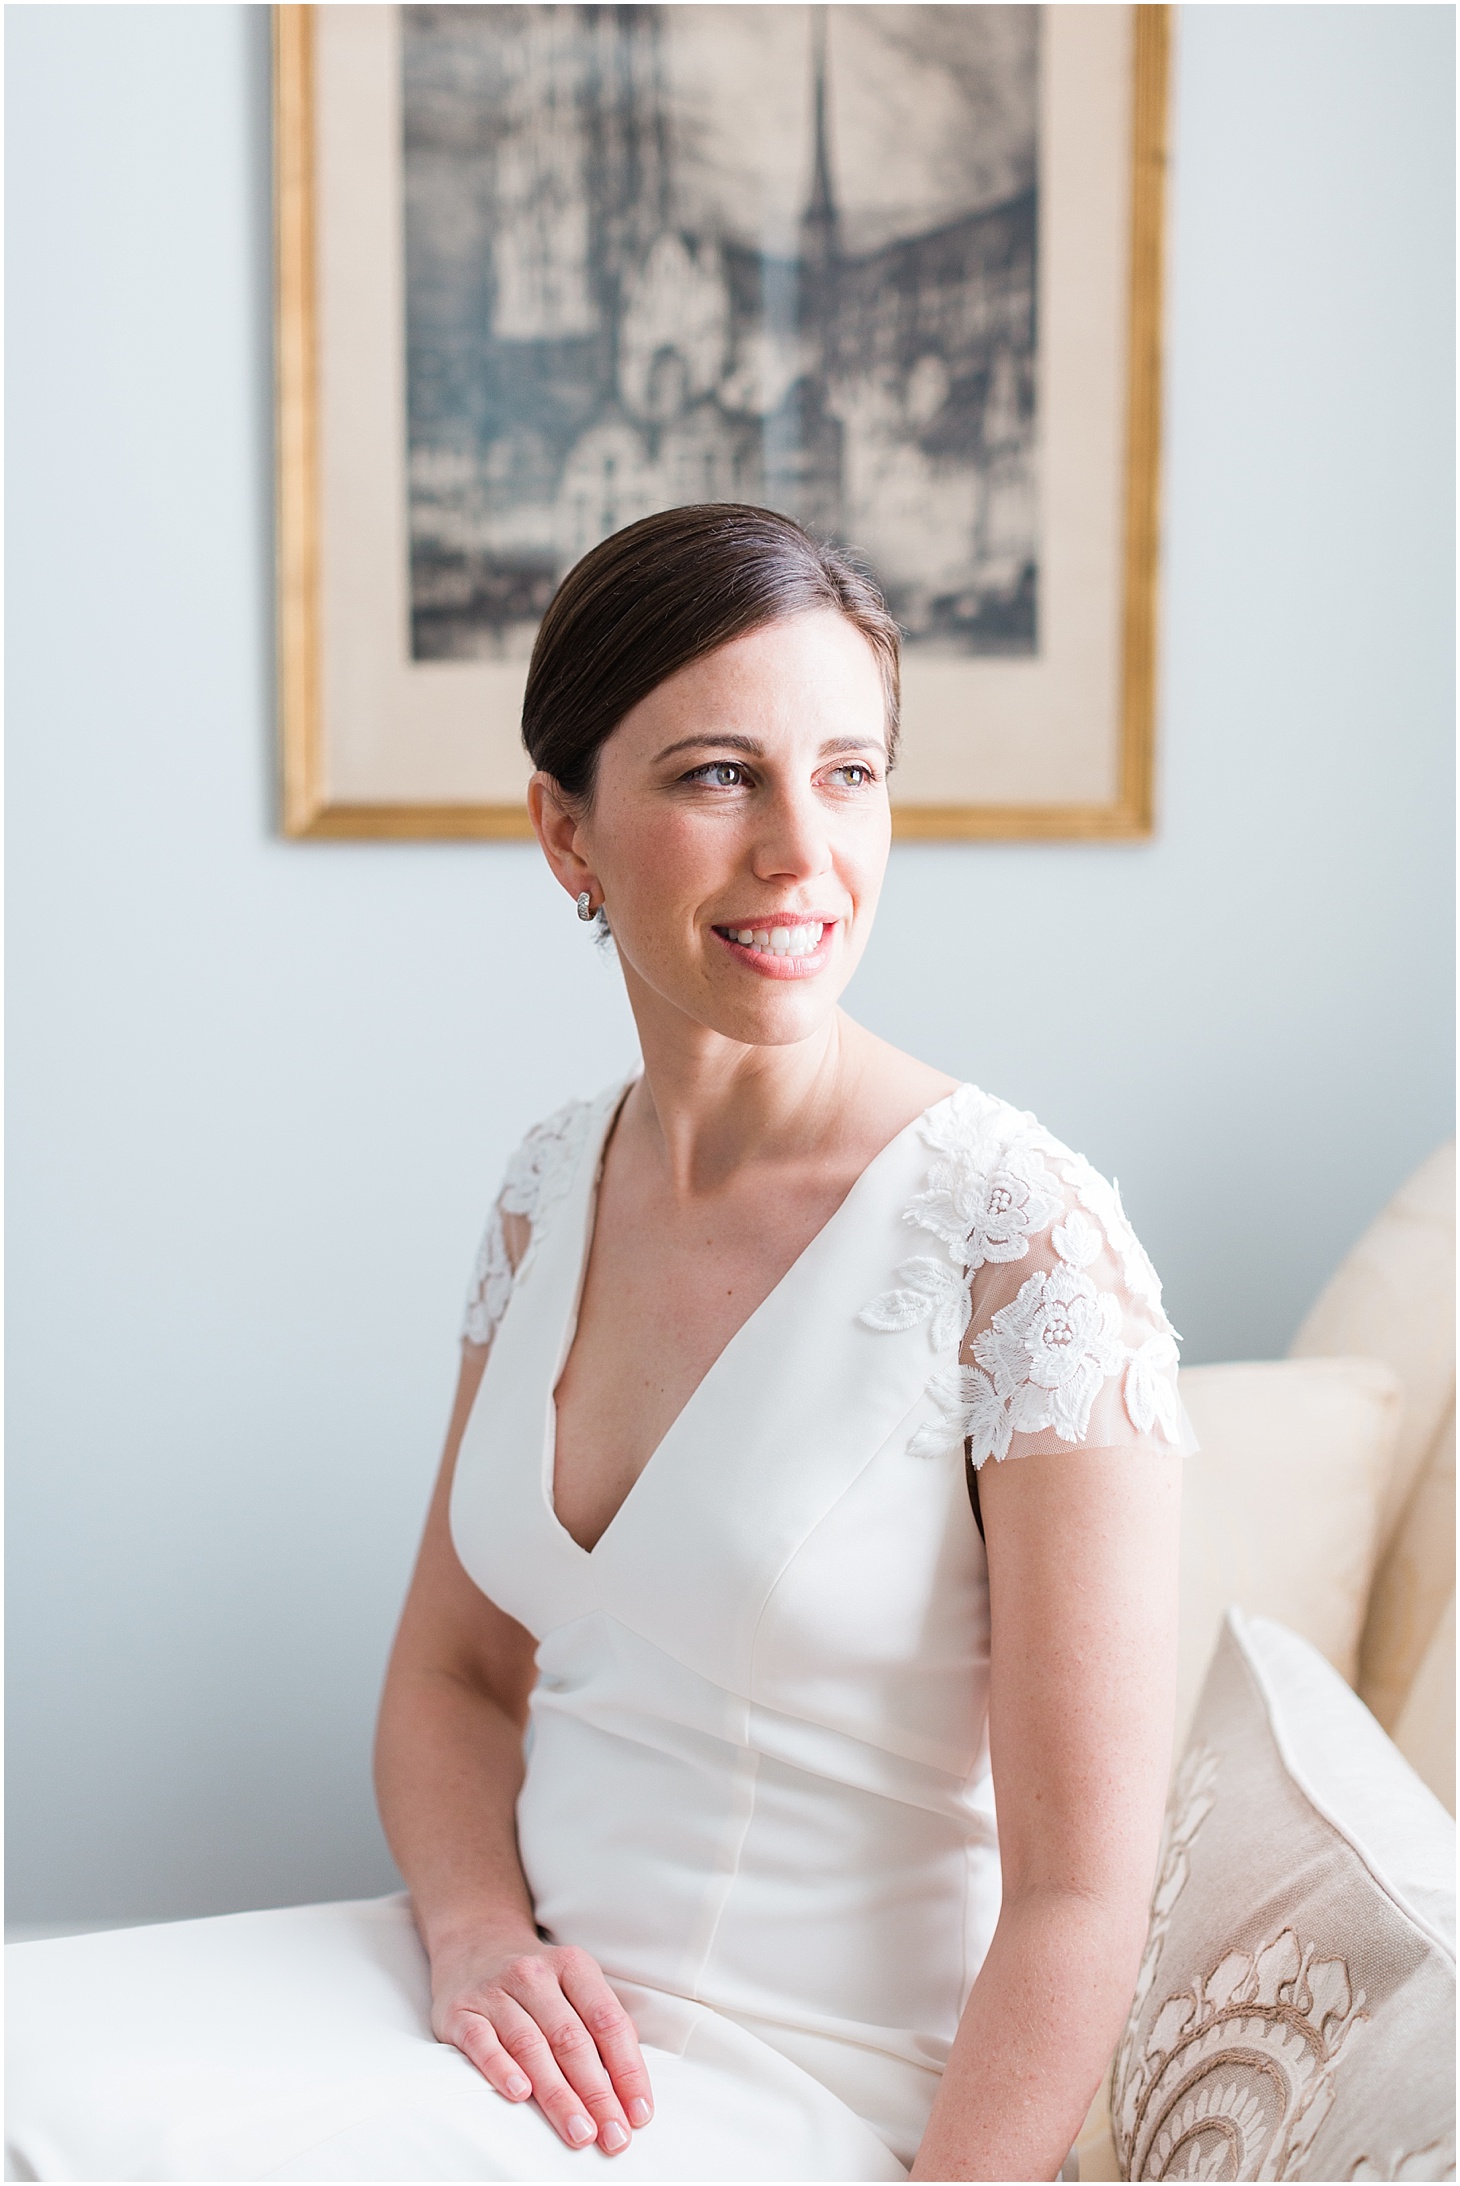 Bridal Portrait at Parent's House | Ceremony at the Holy Rosary Church | Burgundy and Blush DC Wedding at District Winery | Sarah Bradshaw Photography